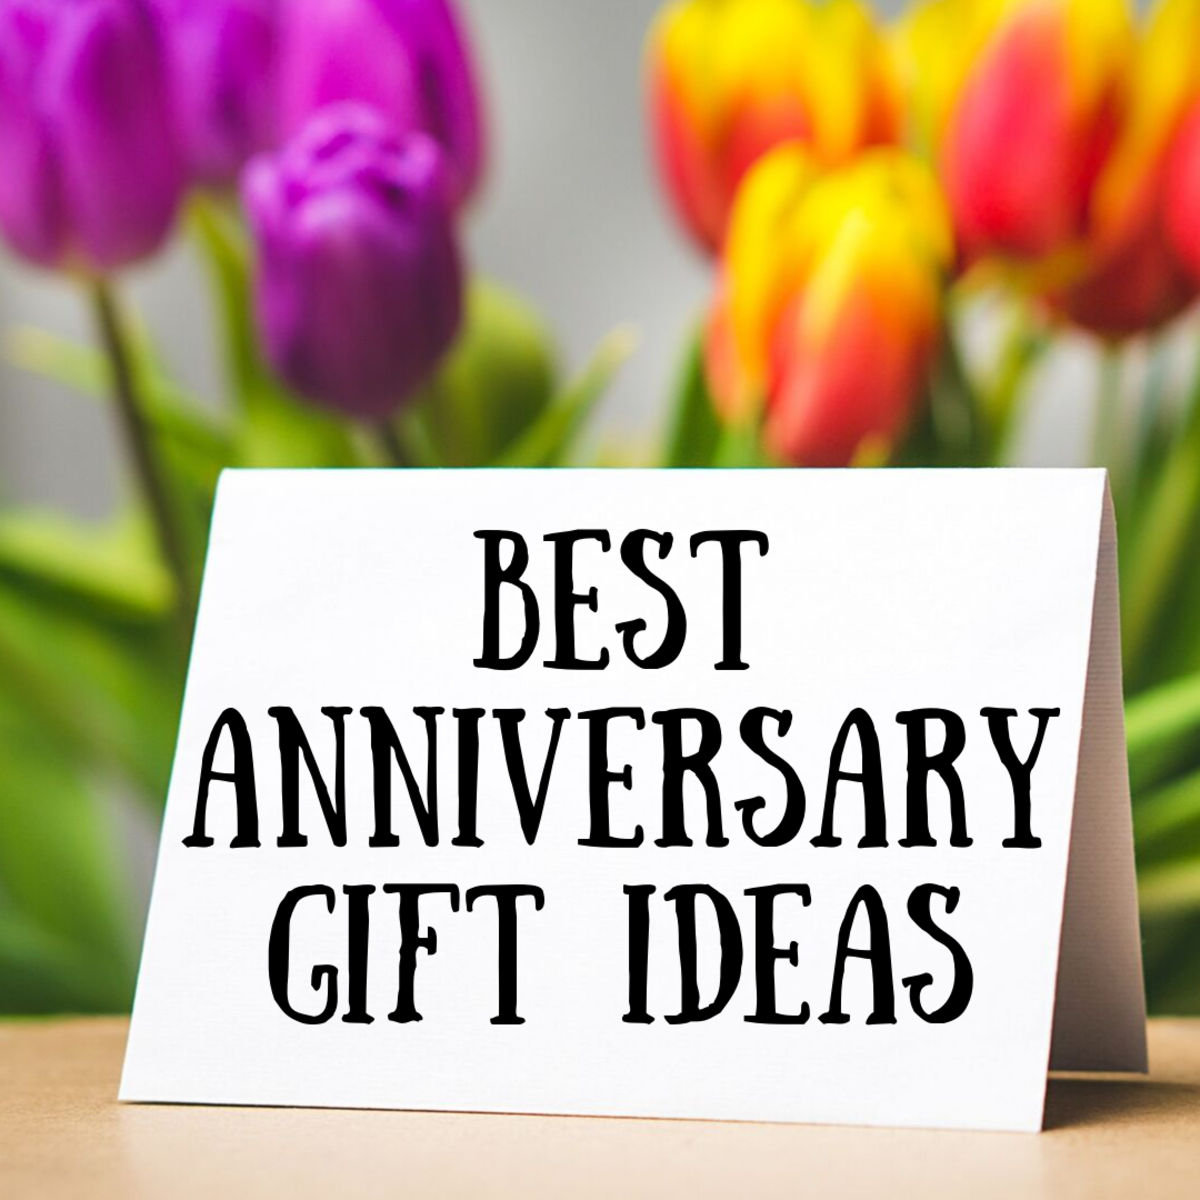 Top 10 Best Anniversary Gifts